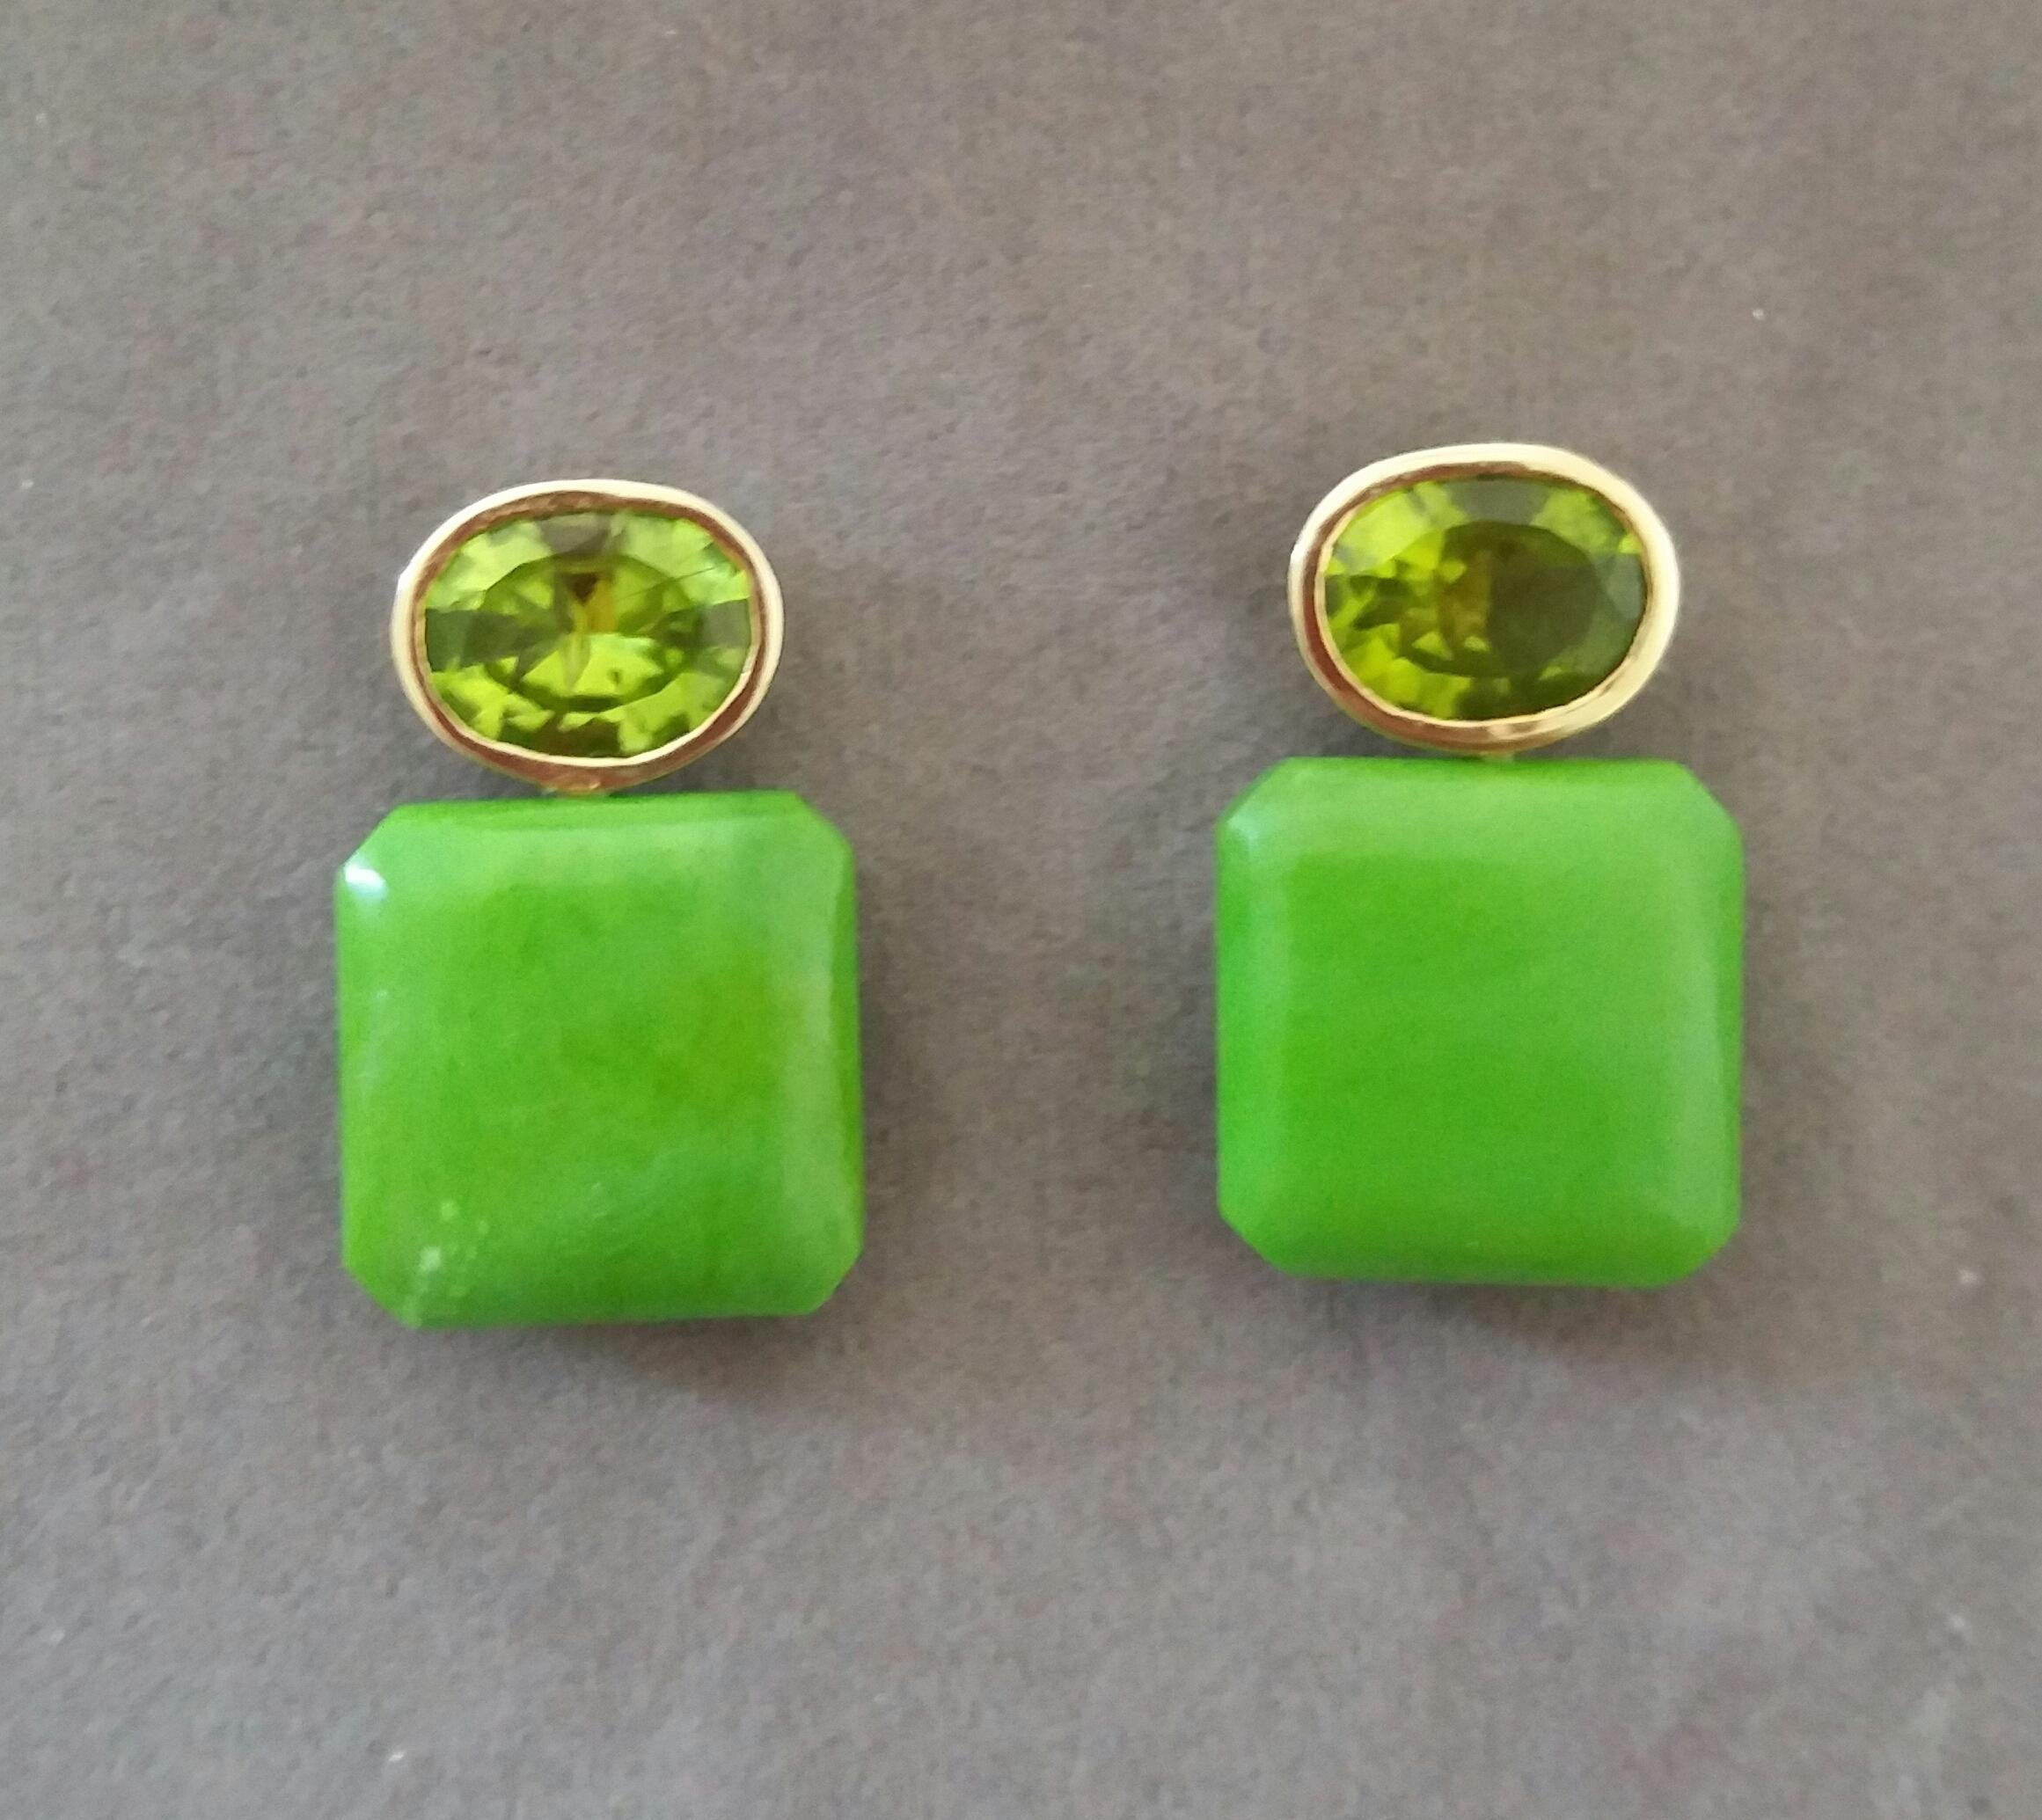 Simple chic stud earrings with a pair of Oval Cut Peridots measuring 8mm x10 mm set in solid 14 Kt. yellow gold on the top and in the lower parts 2 Turkmenistan Green Turquoise Octagon meausring 16x16 mm .
In 1978 our workshop started in Italy to